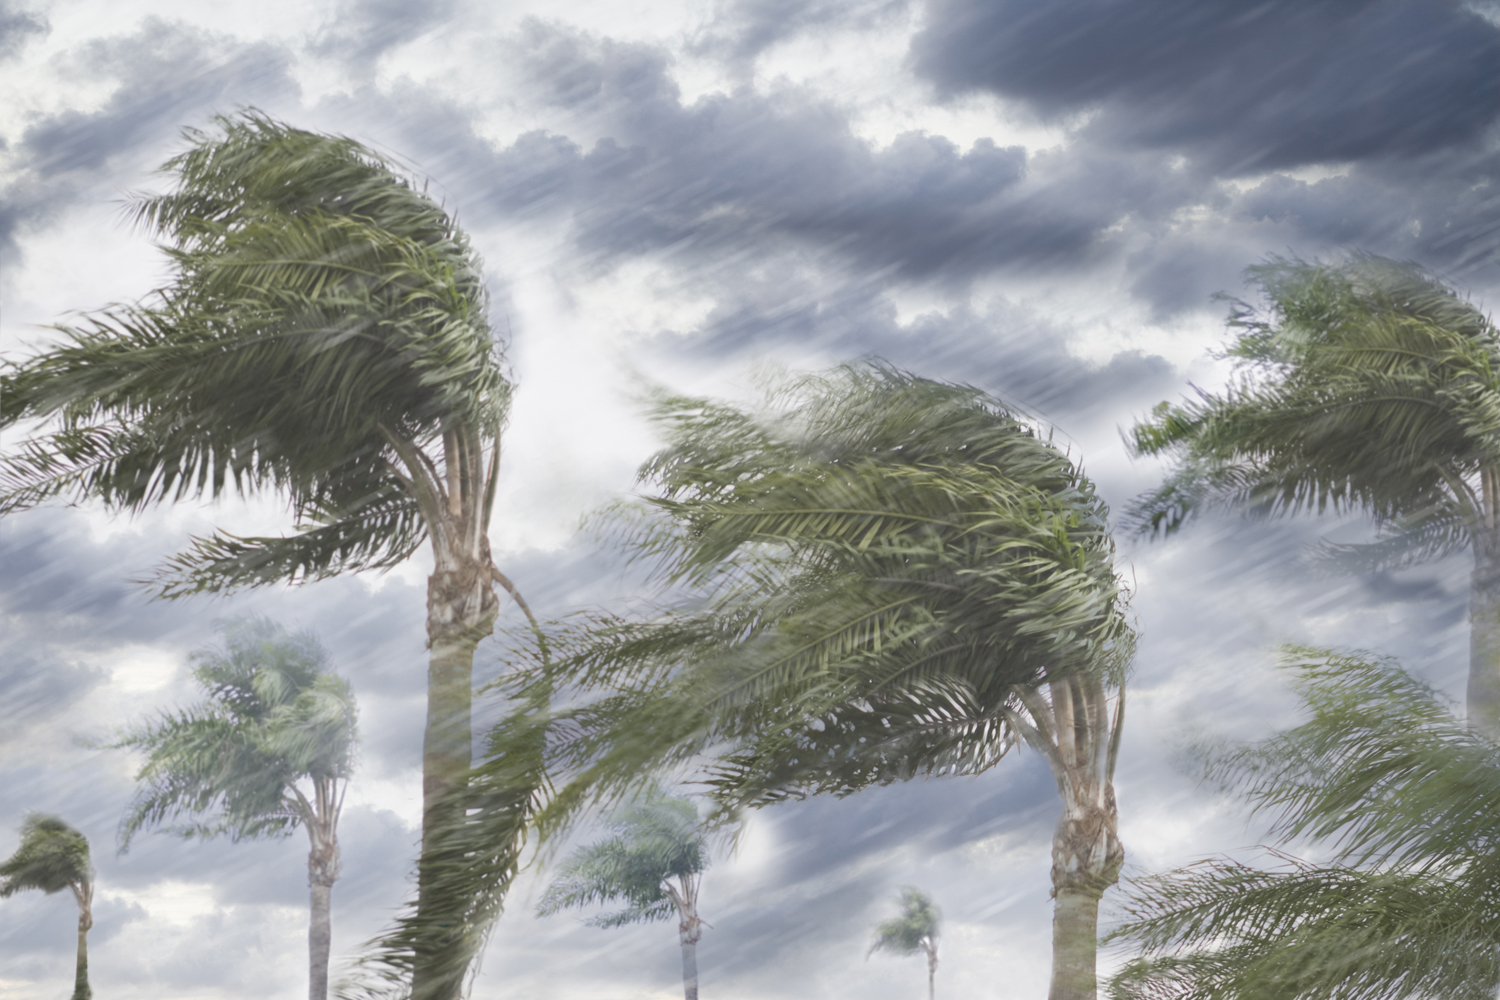 Temper tantrum demonstrated with trees blowing in hurricane